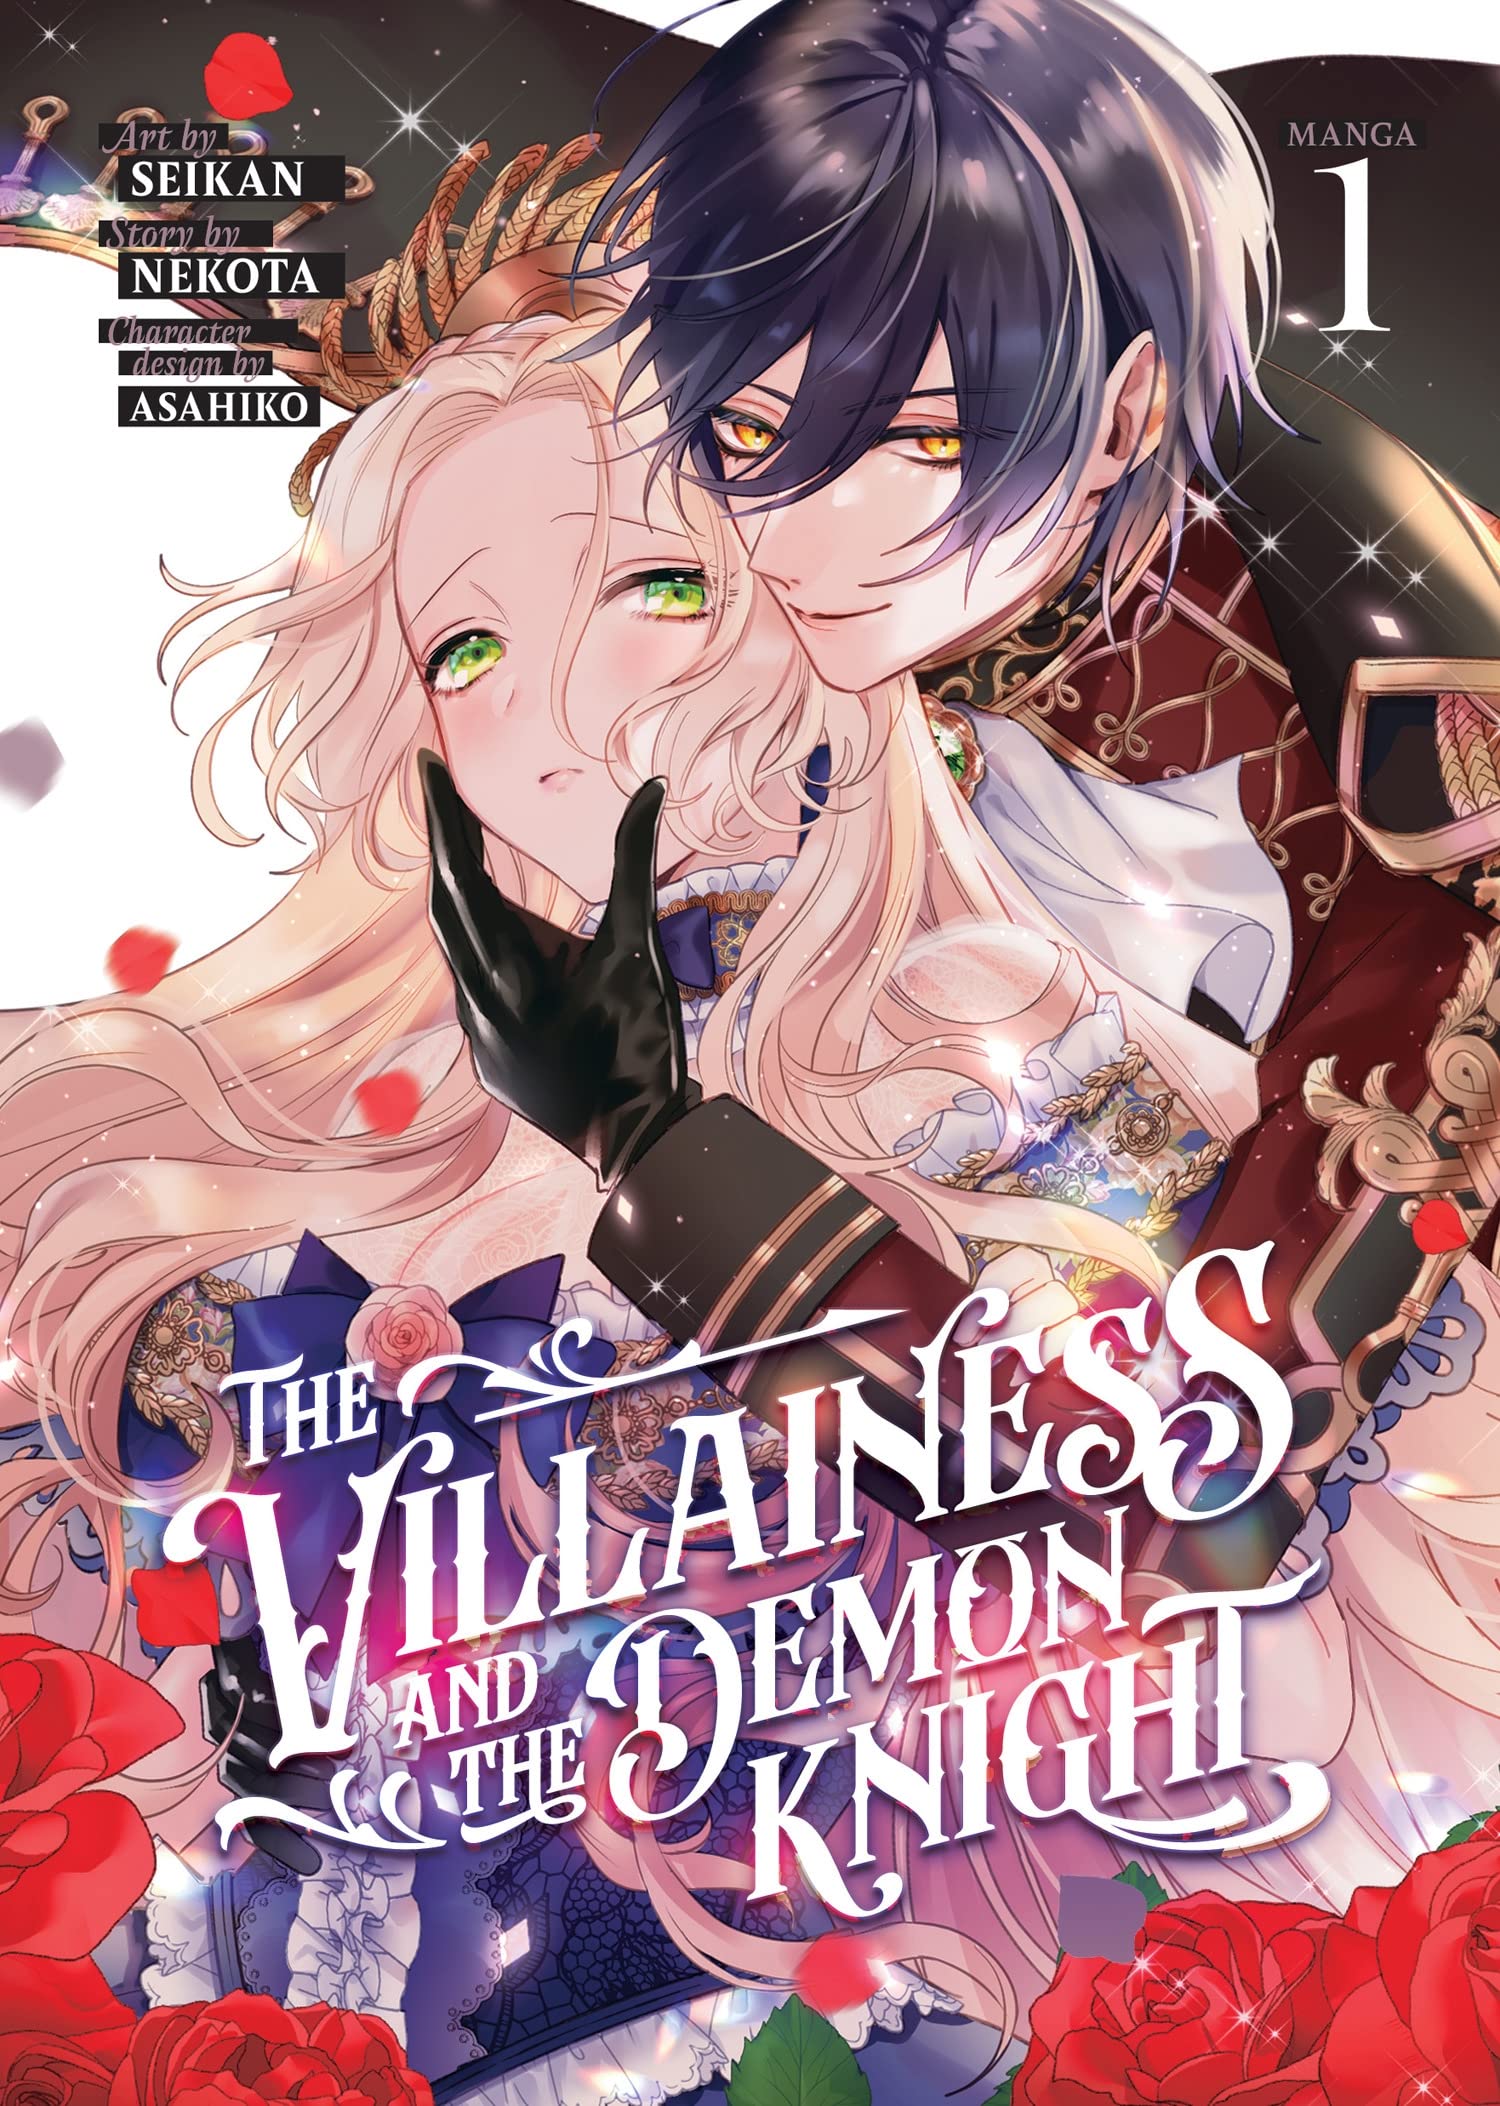 The Villainess and the Demon Knight (Manga) Vol. 01